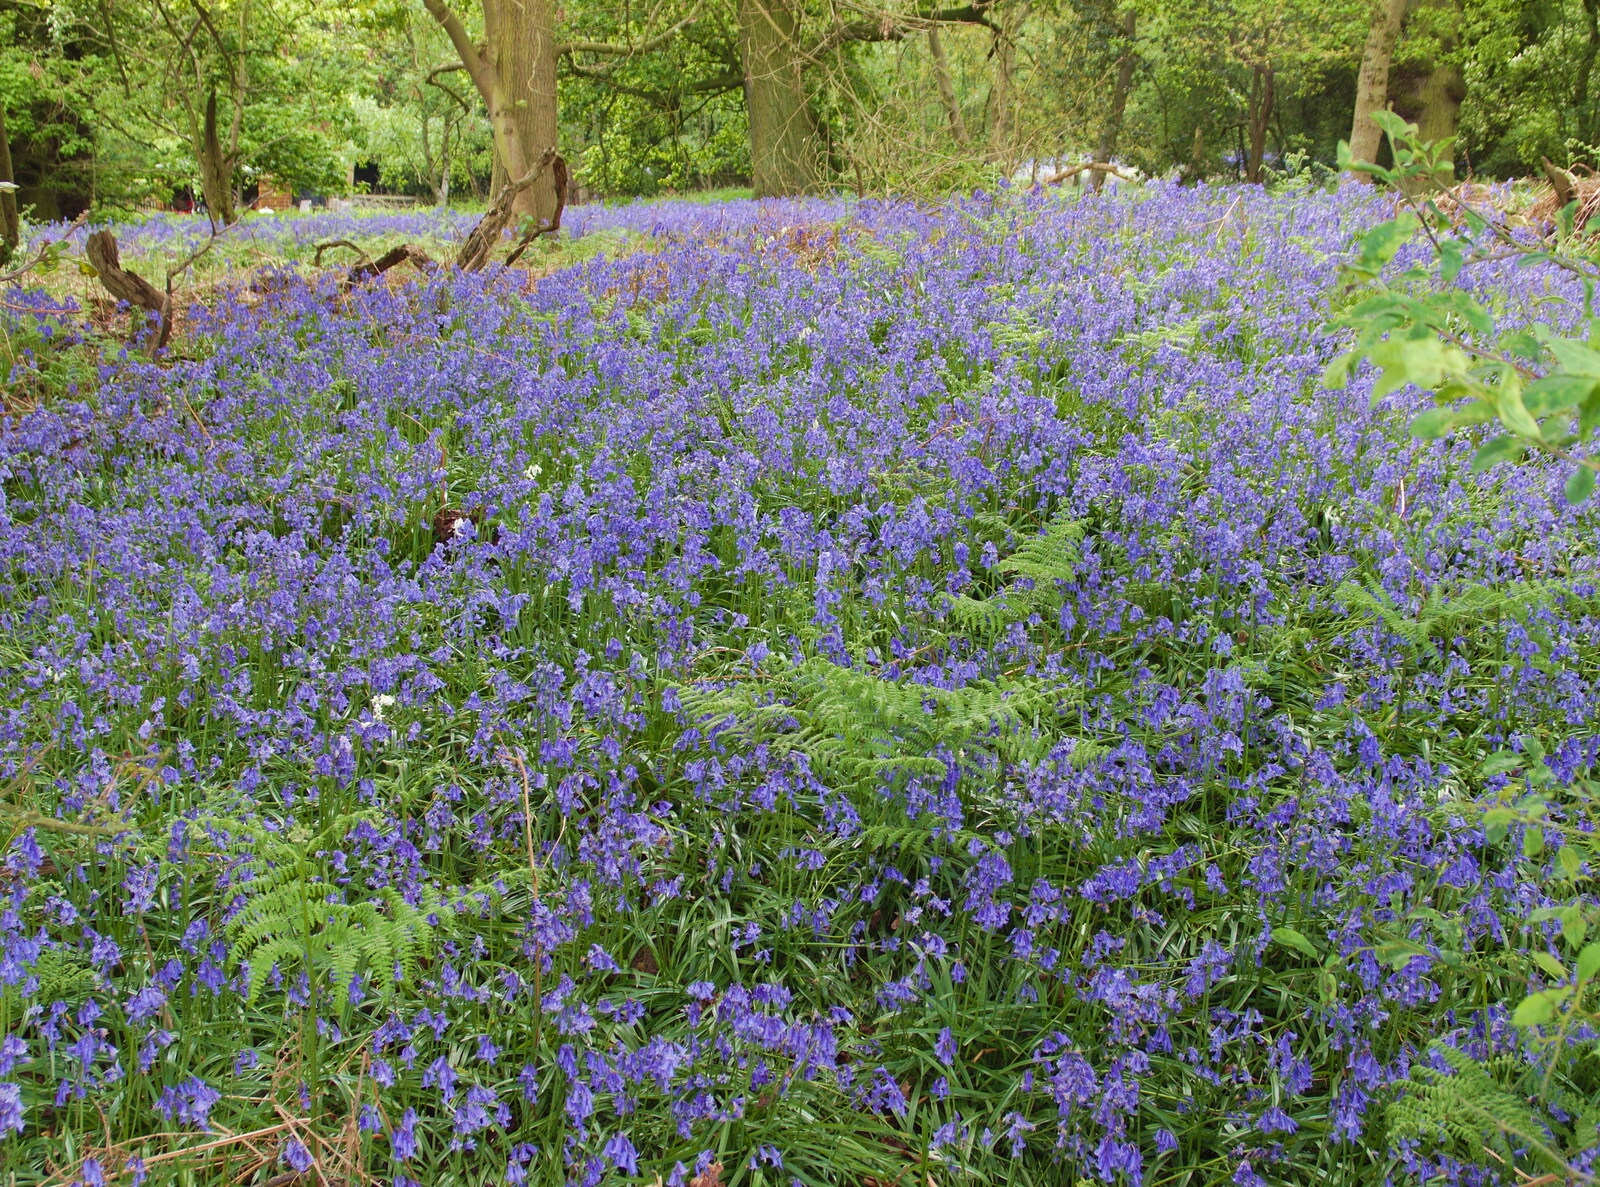 A lovely bluebell wood from A Return to Bedford: the BSCC Annual Weekend Away, Shefford, Bedfordshire - 10th May 2014